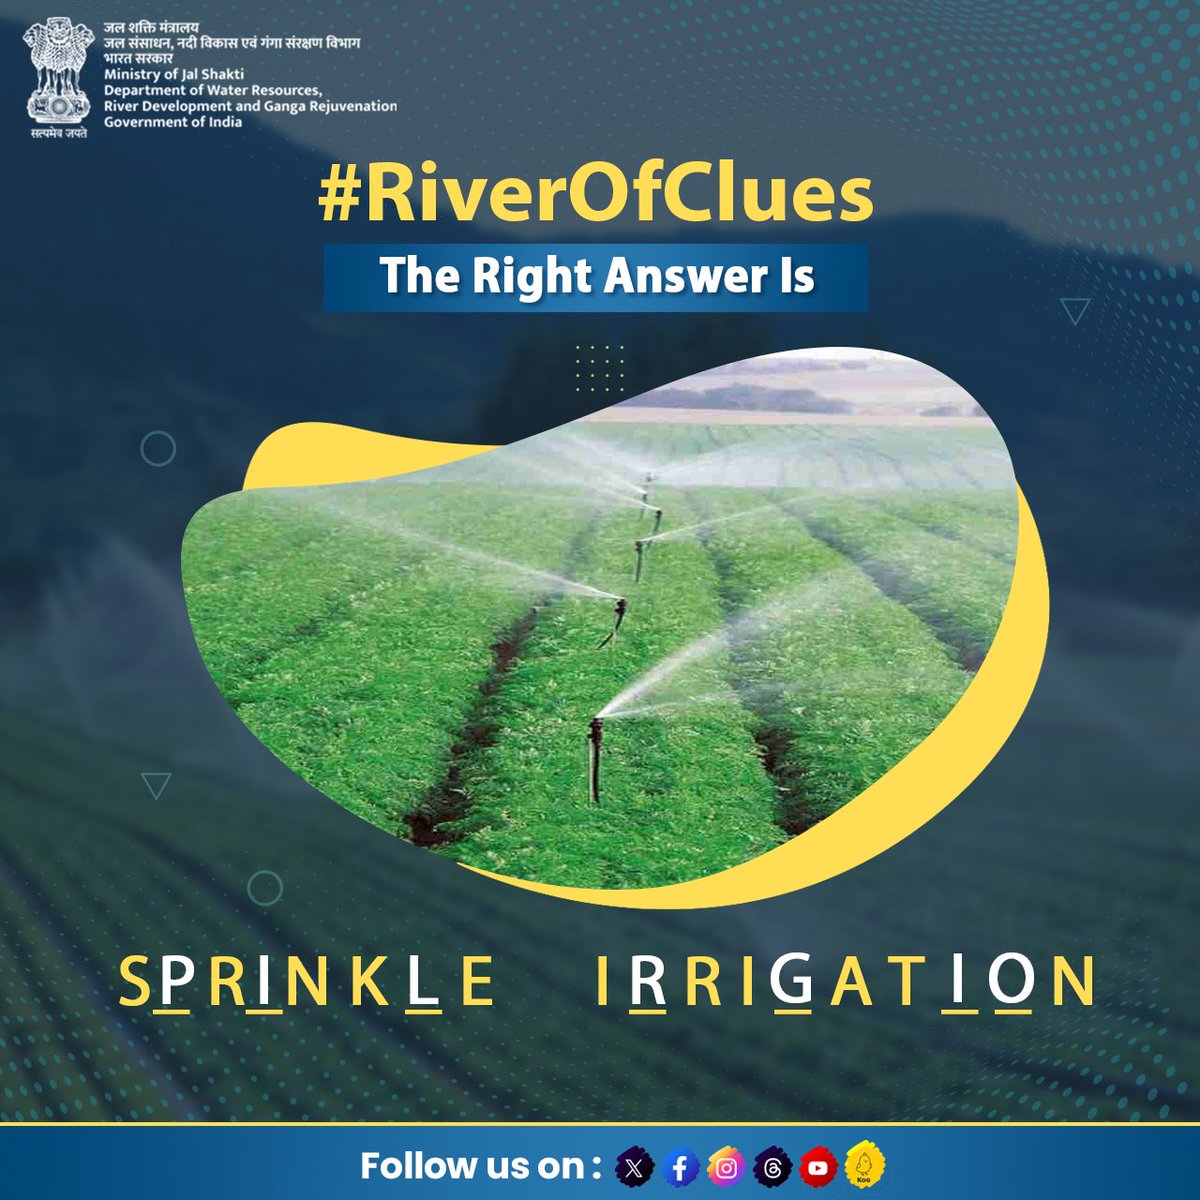 Congratulations to everyone who cracked #riverofclues mystery! Let's keep the momentum going & invite more friends to join in. Tag your friends and dive into the adventure of solving clues together. Let's make waves in unraveling the secrets of @DoWRRDGR_MoJS! #sprinkleirrigation